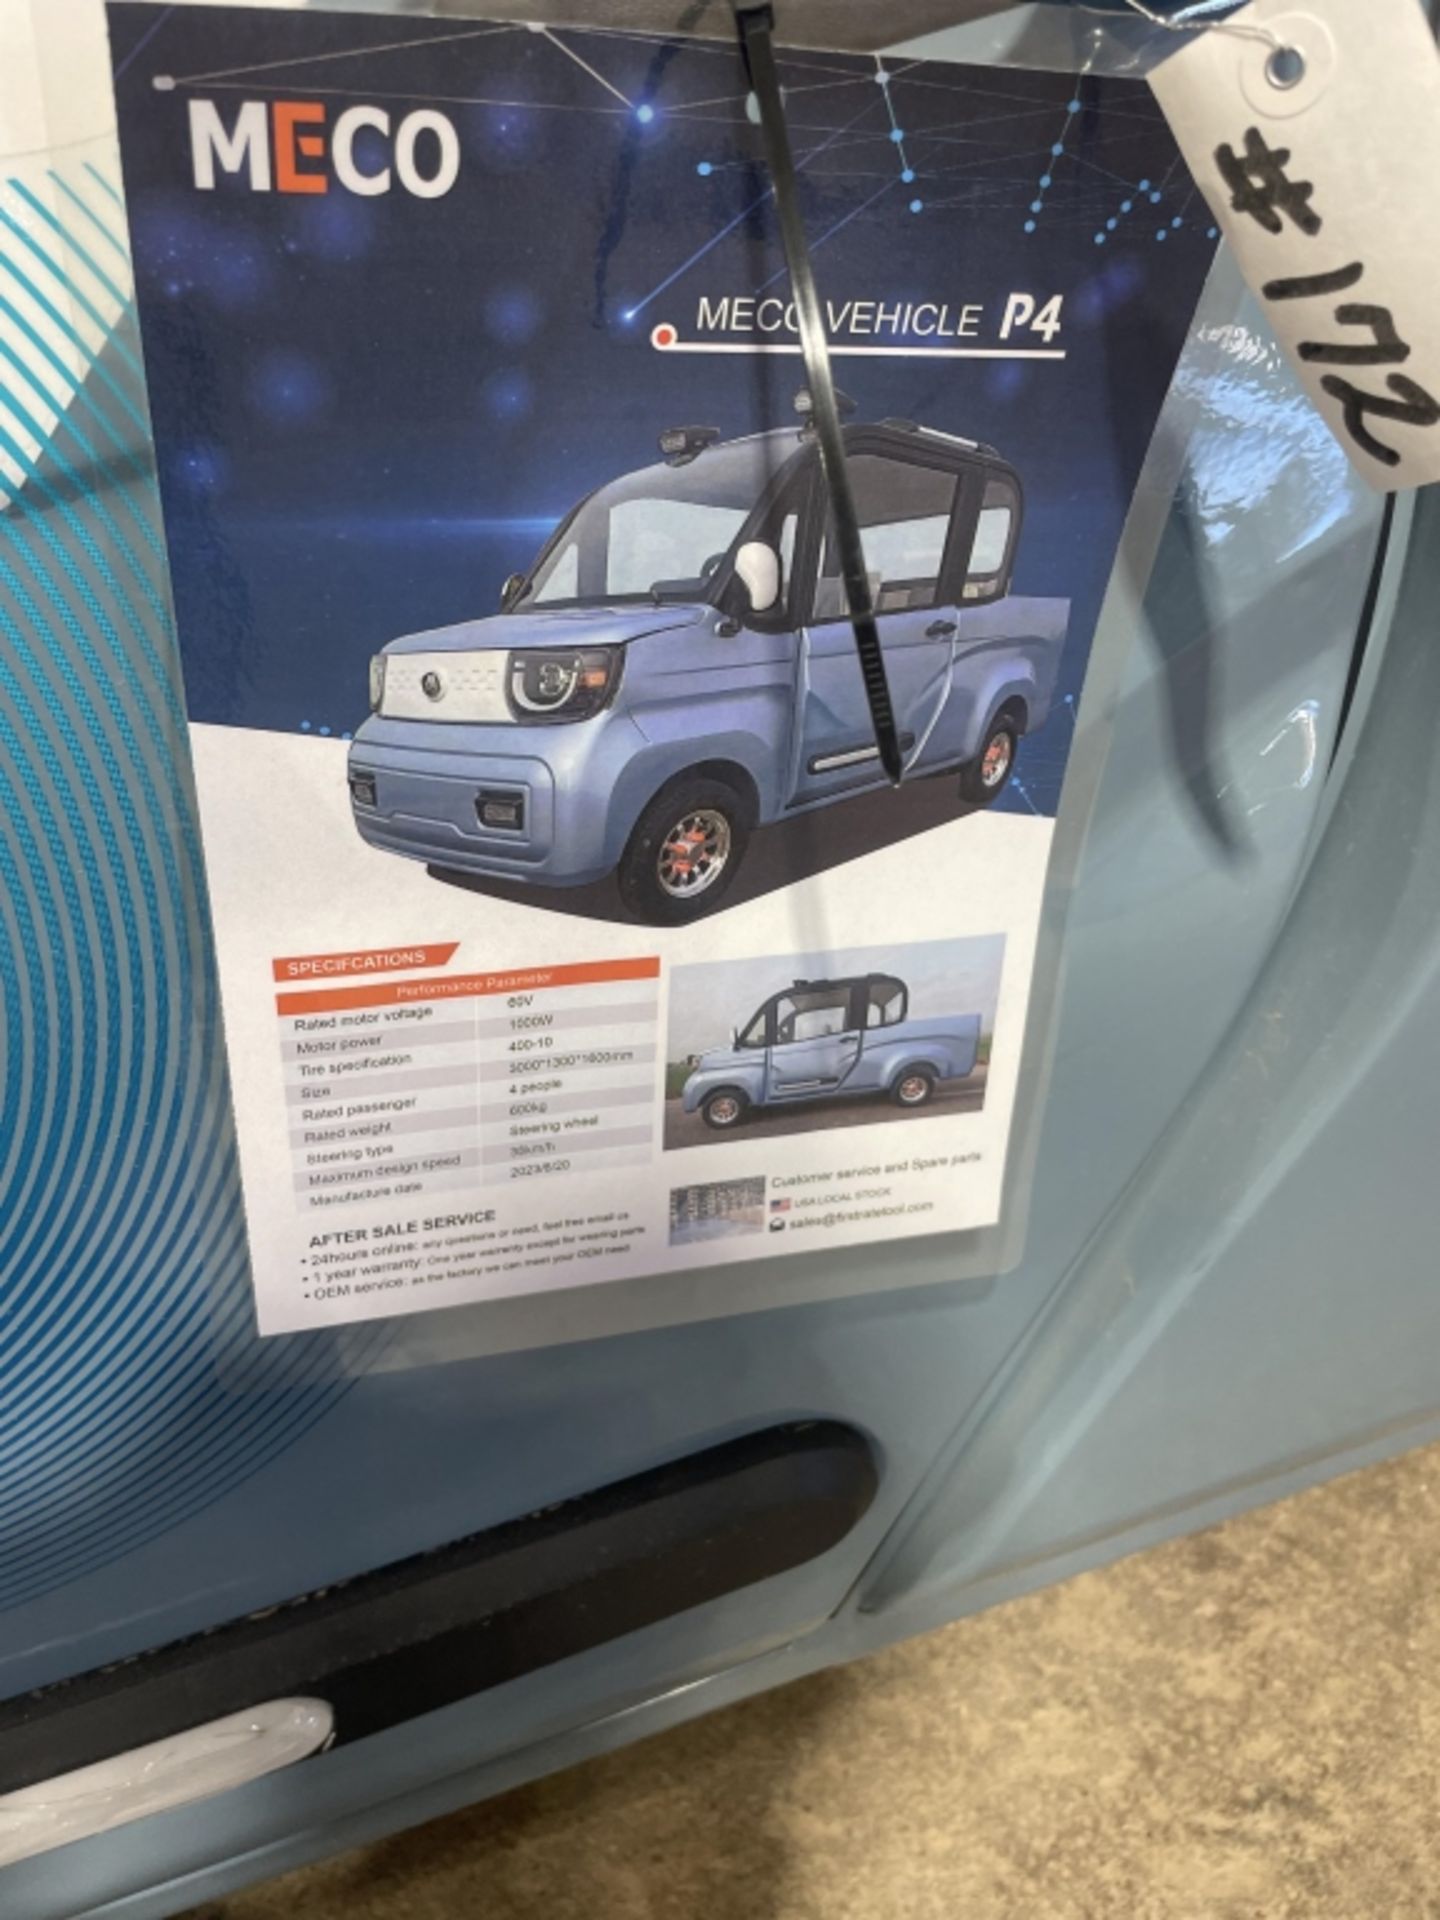 MECO P4 Electric Vehicle - Image 19 of 25